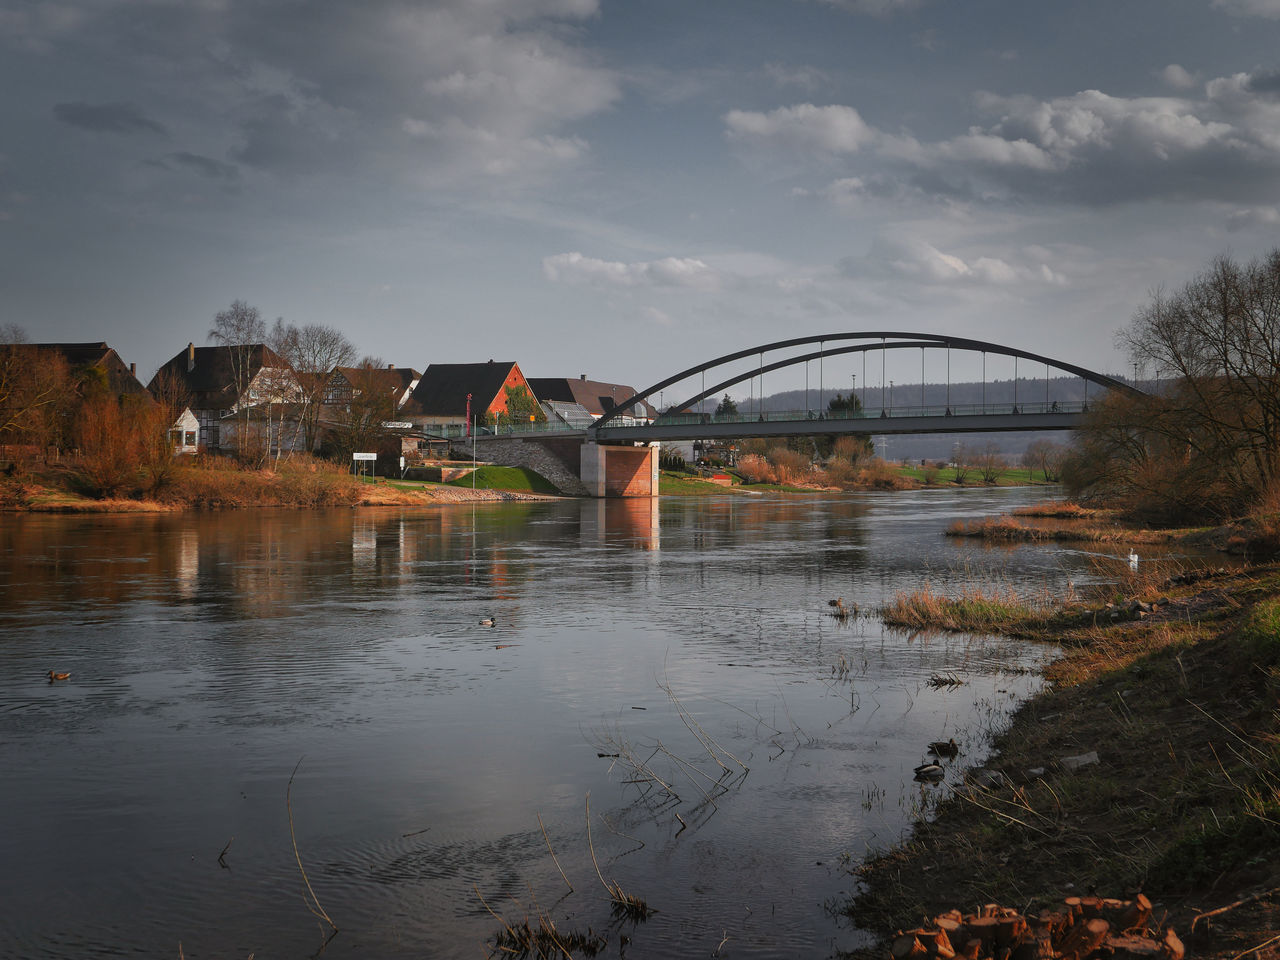 VIEW OF BRIDGE OVER RIVER AGAINST CLOUDY SKY